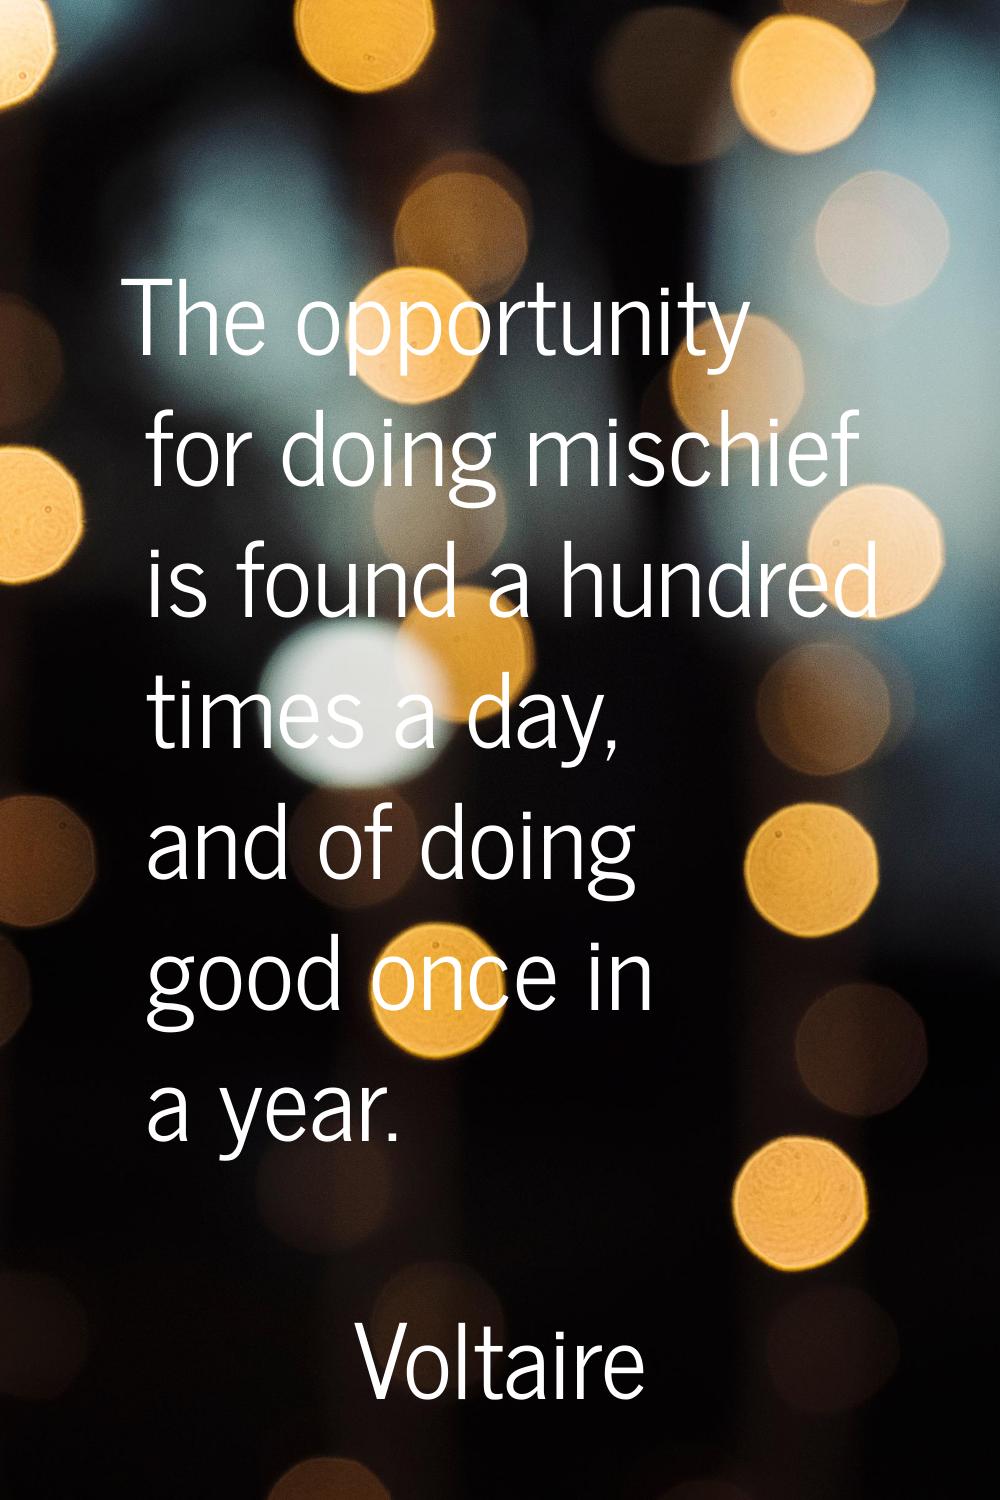 The opportunity for doing mischief is found a hundred times a day, and of doing good once in a year